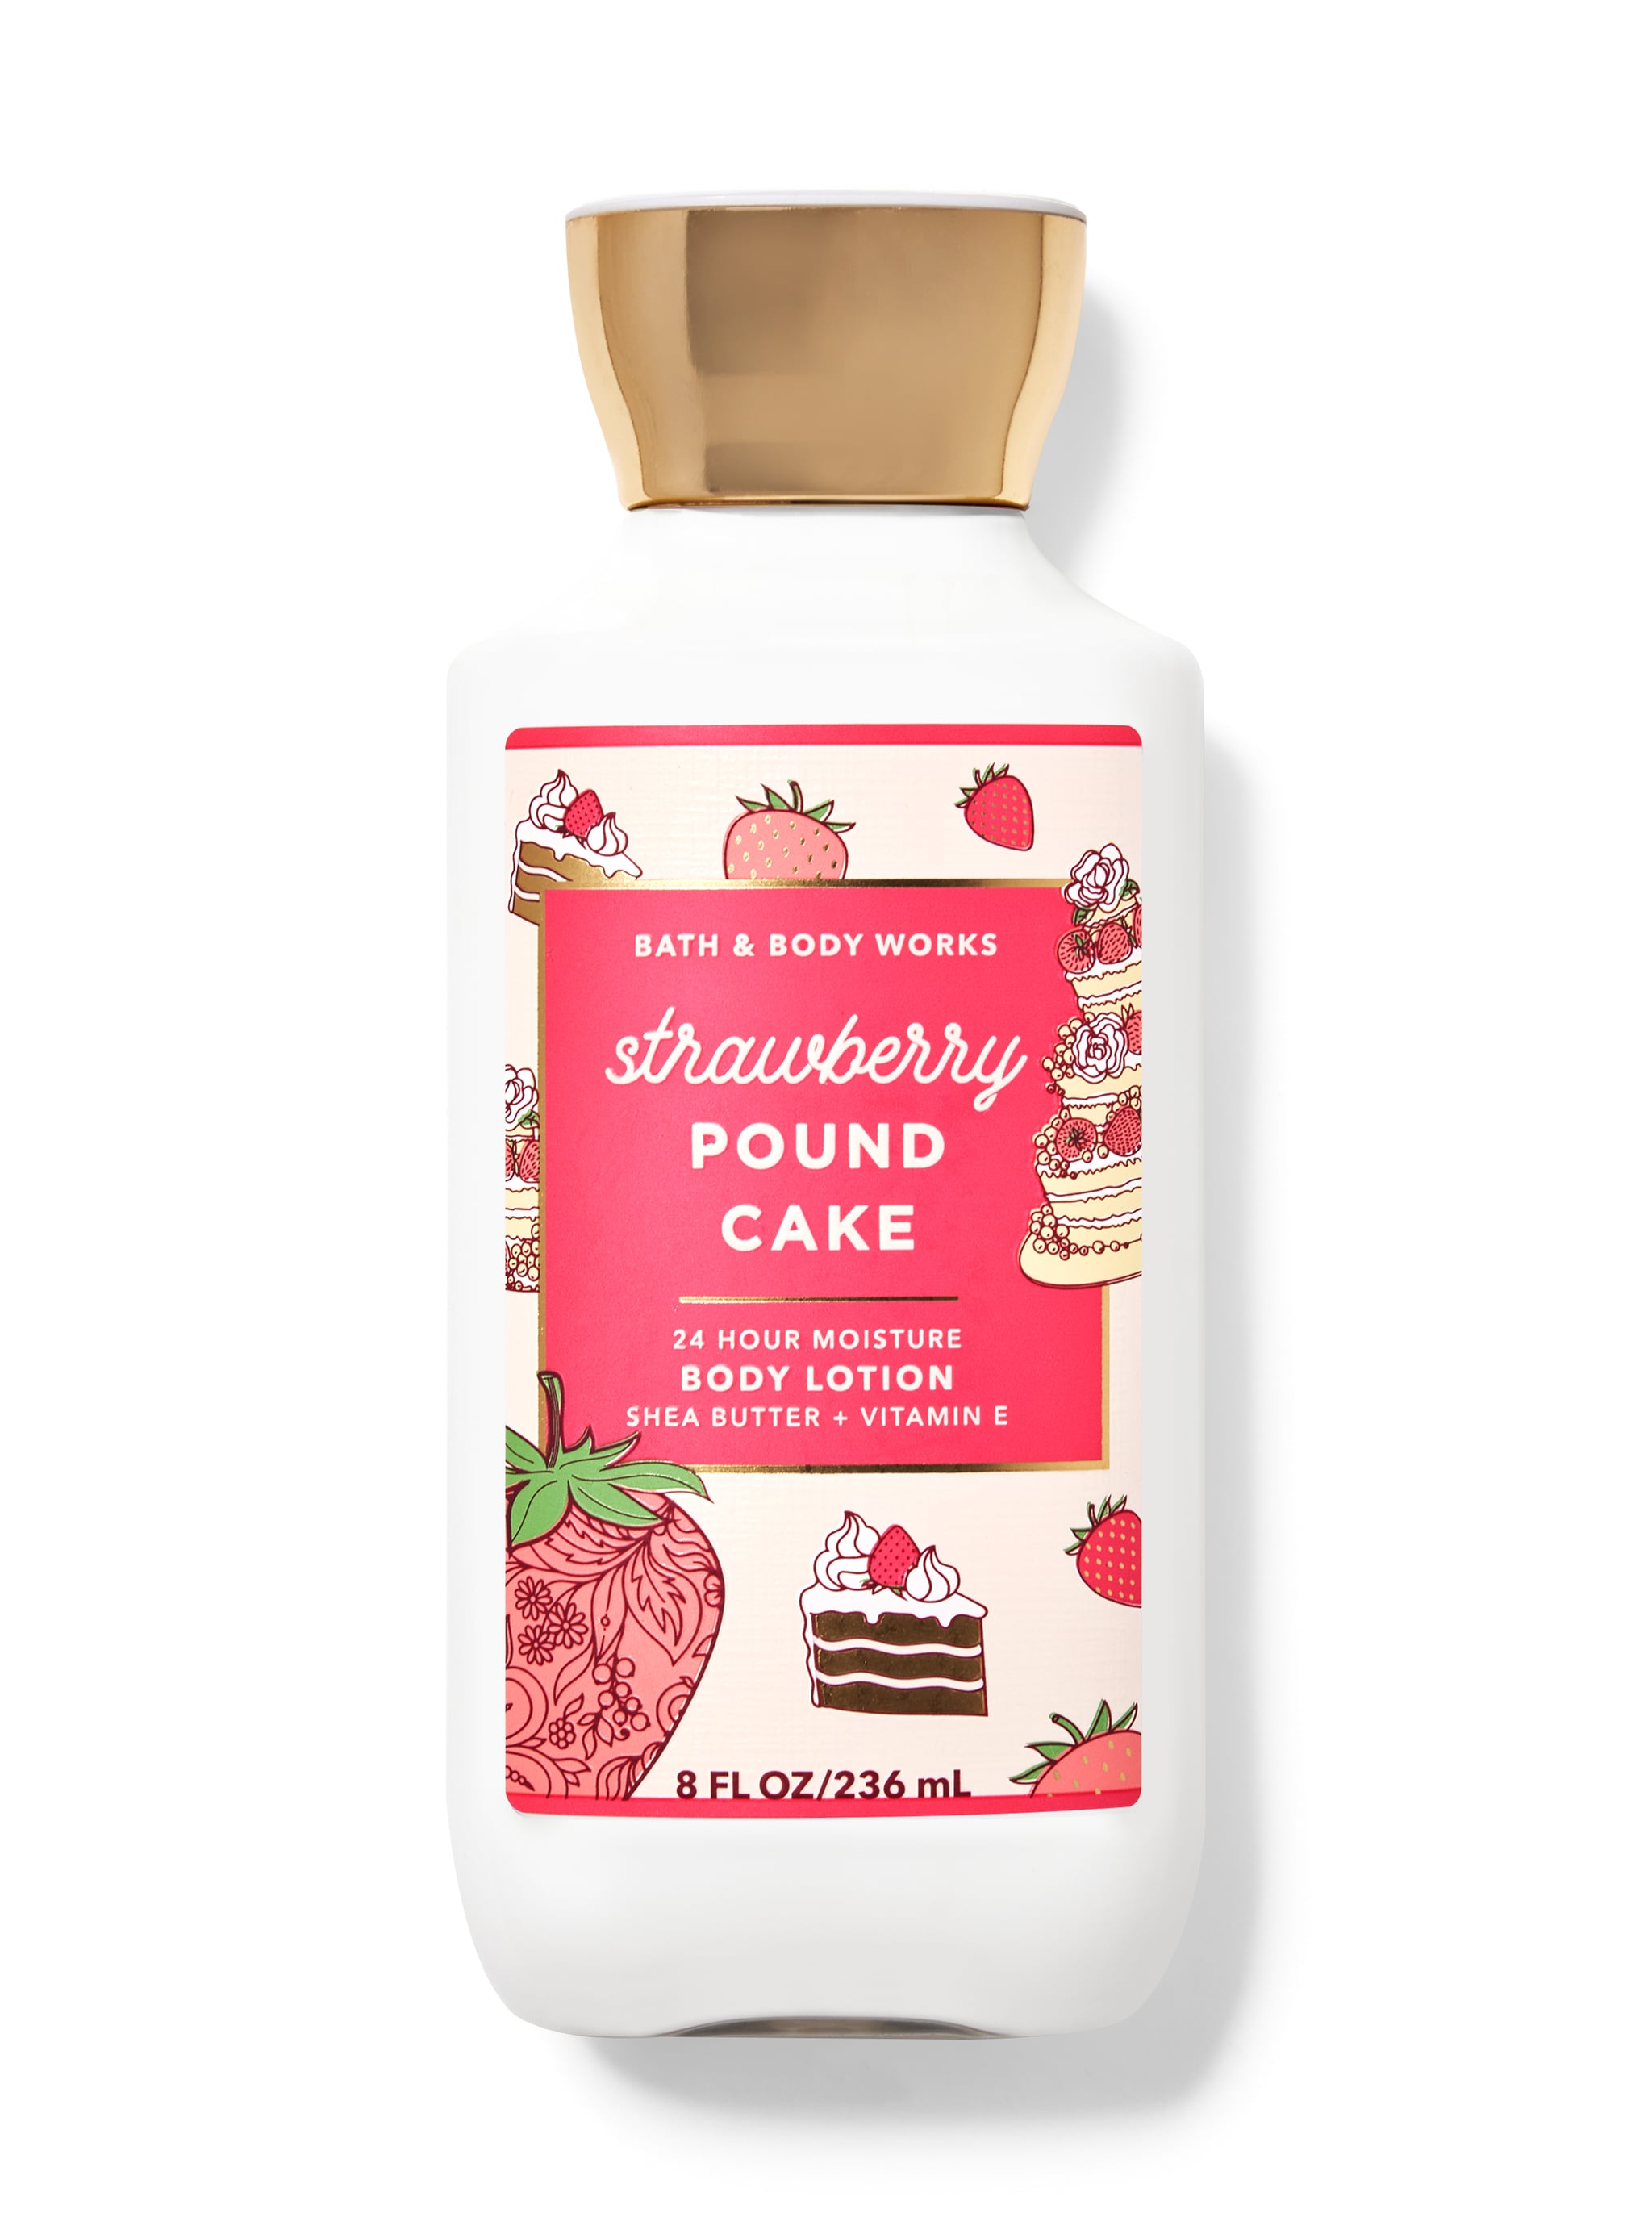 Strawberry Pound Cake Body Lotion | Bath & Thanksgiving Collection Is Here, and You Don't to Miss It | POPSUGAR Beauty Photo 28